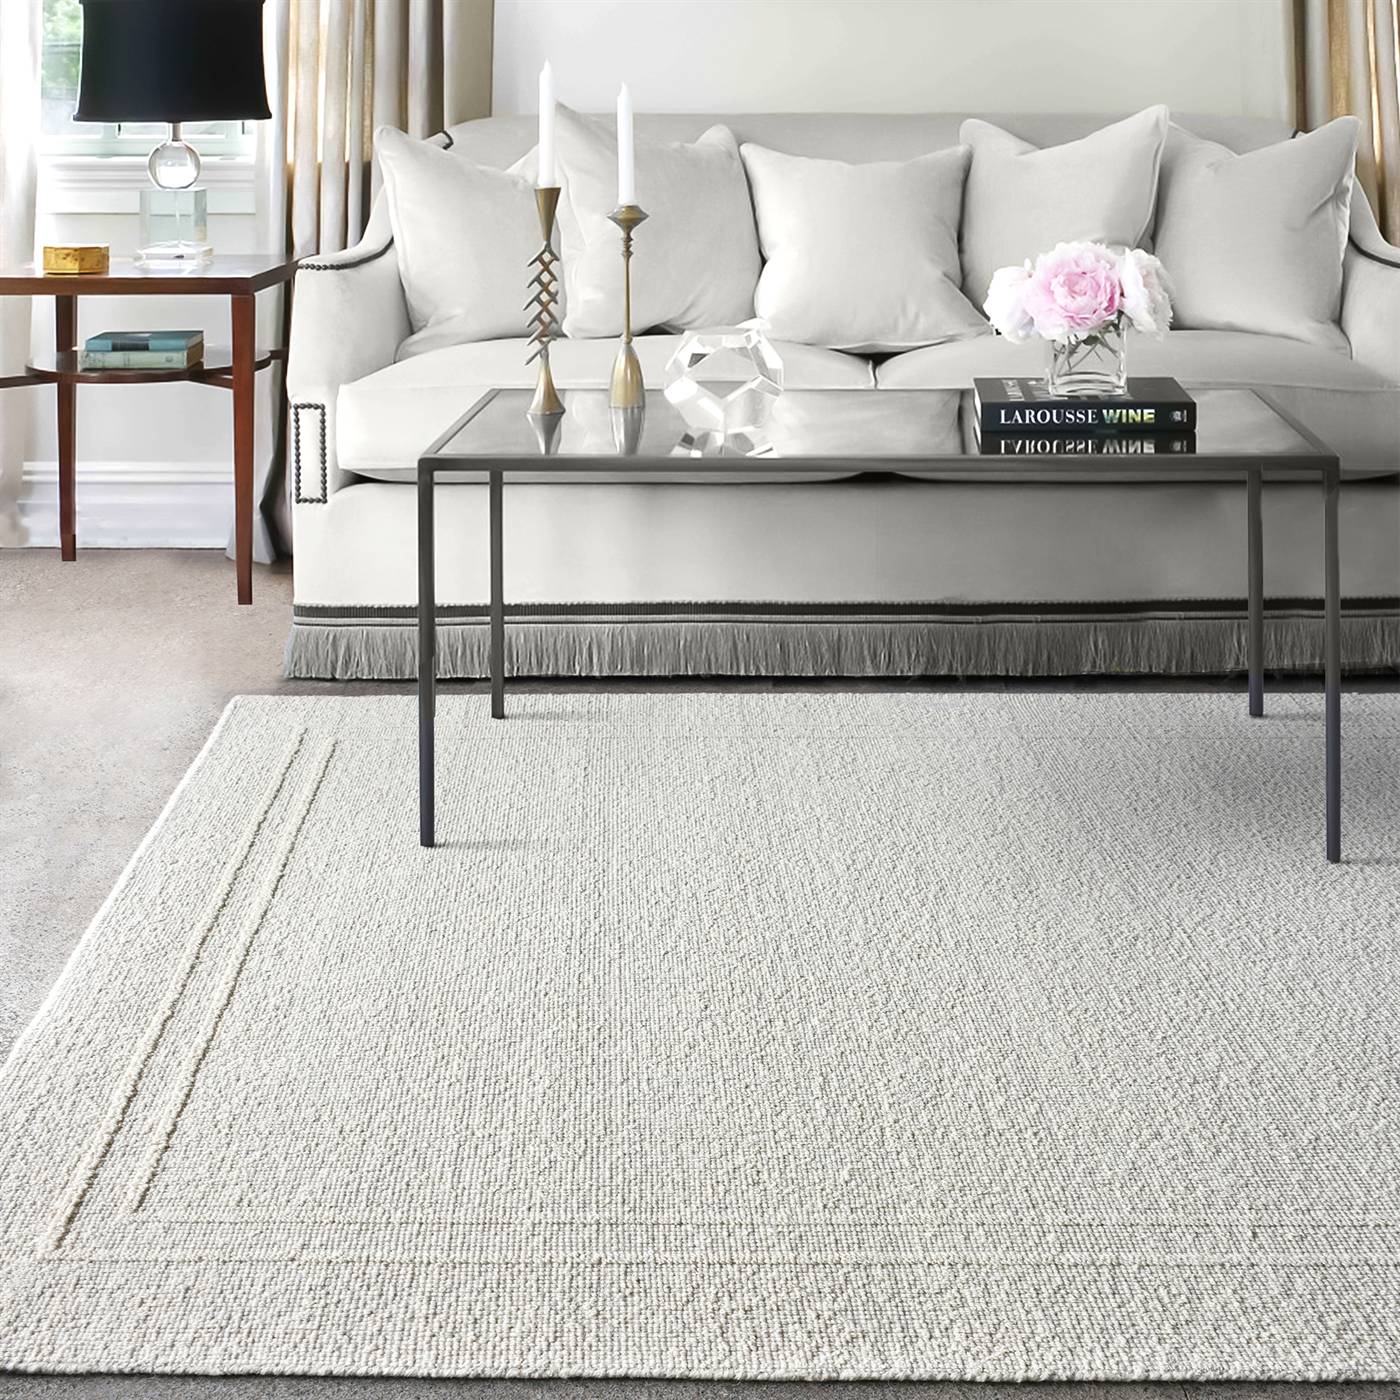 Area Rug, Bedroom Rug, Living Room Rug, Living Area Rug, Indian Rug, Office Carpet, Office Rug, Shop Rug Online, Natural White, Wool, Hand Woven, Over Tufted, Handwoven, All Loop, Texture 